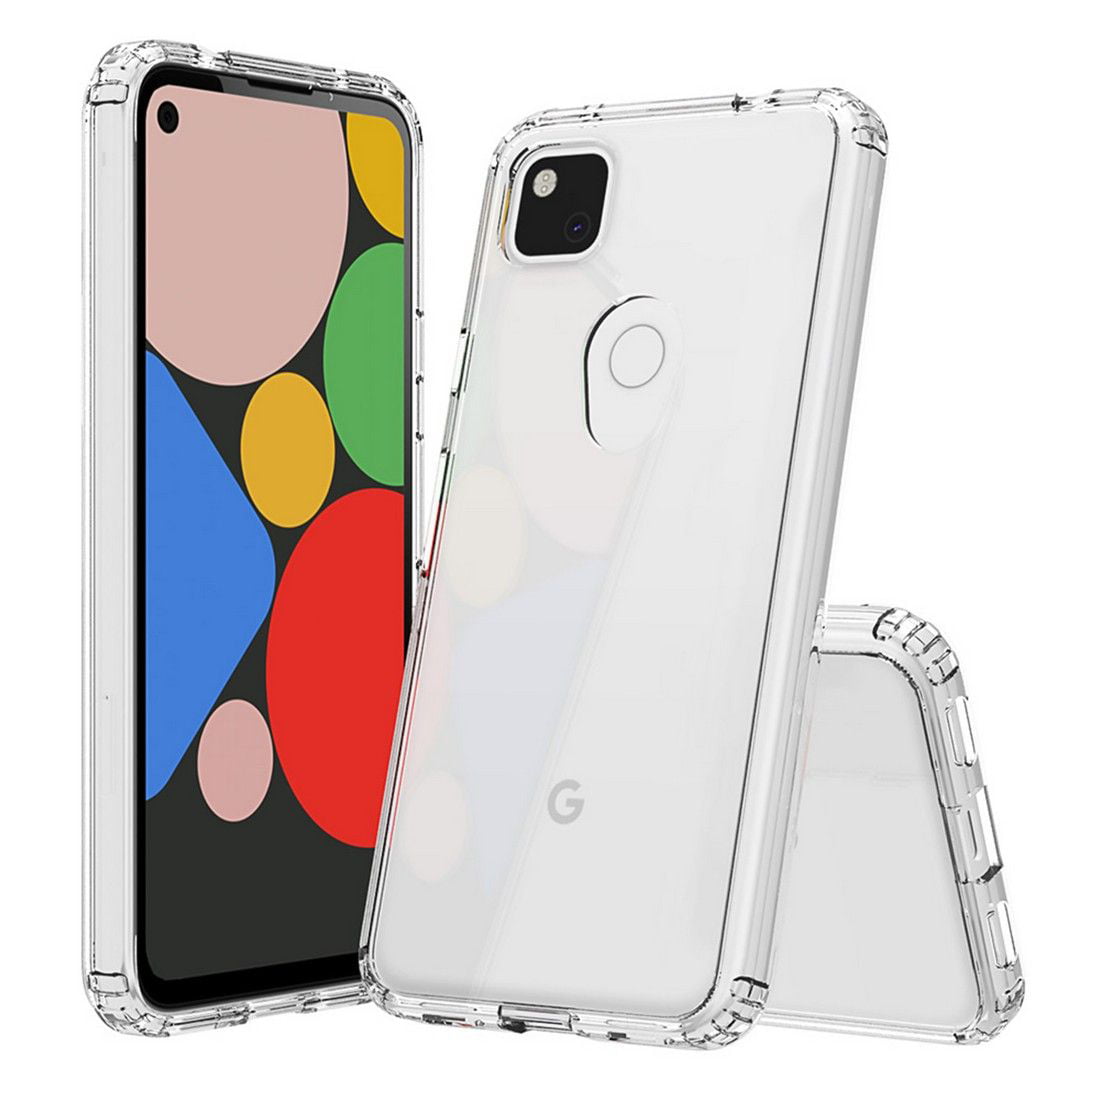 For Google Pixel 4a 2020 5.8 inch Slim TPU Clear Silicone Gel Back Case Cover 